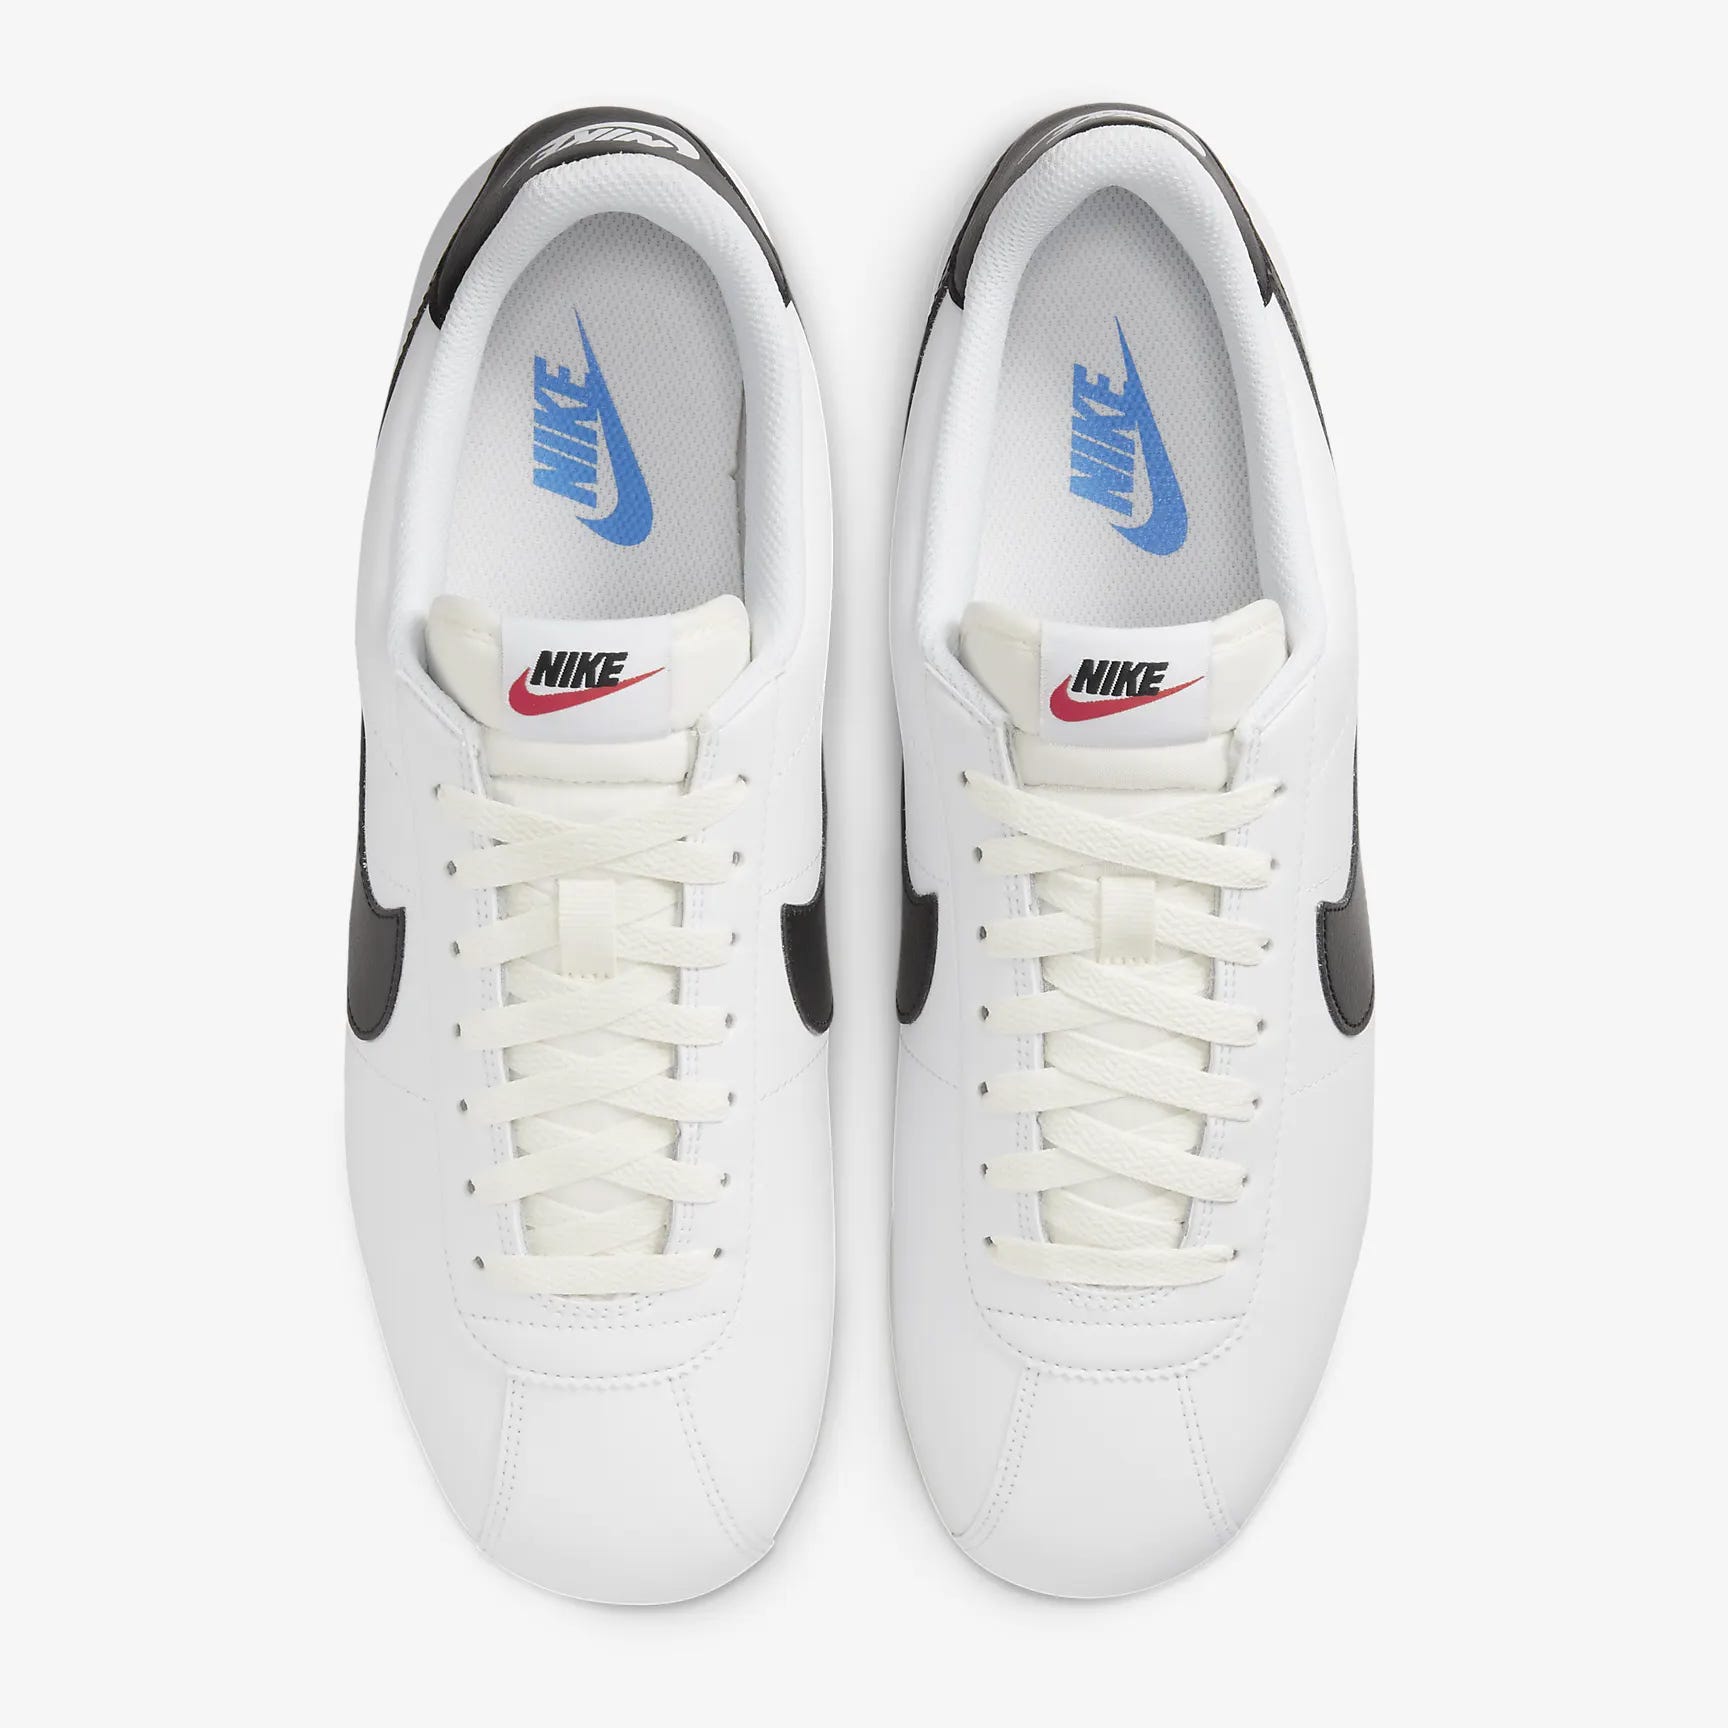 A pair of white sneakers with a distinctive swoosh logo on the sides, black accents, and laced fronts.